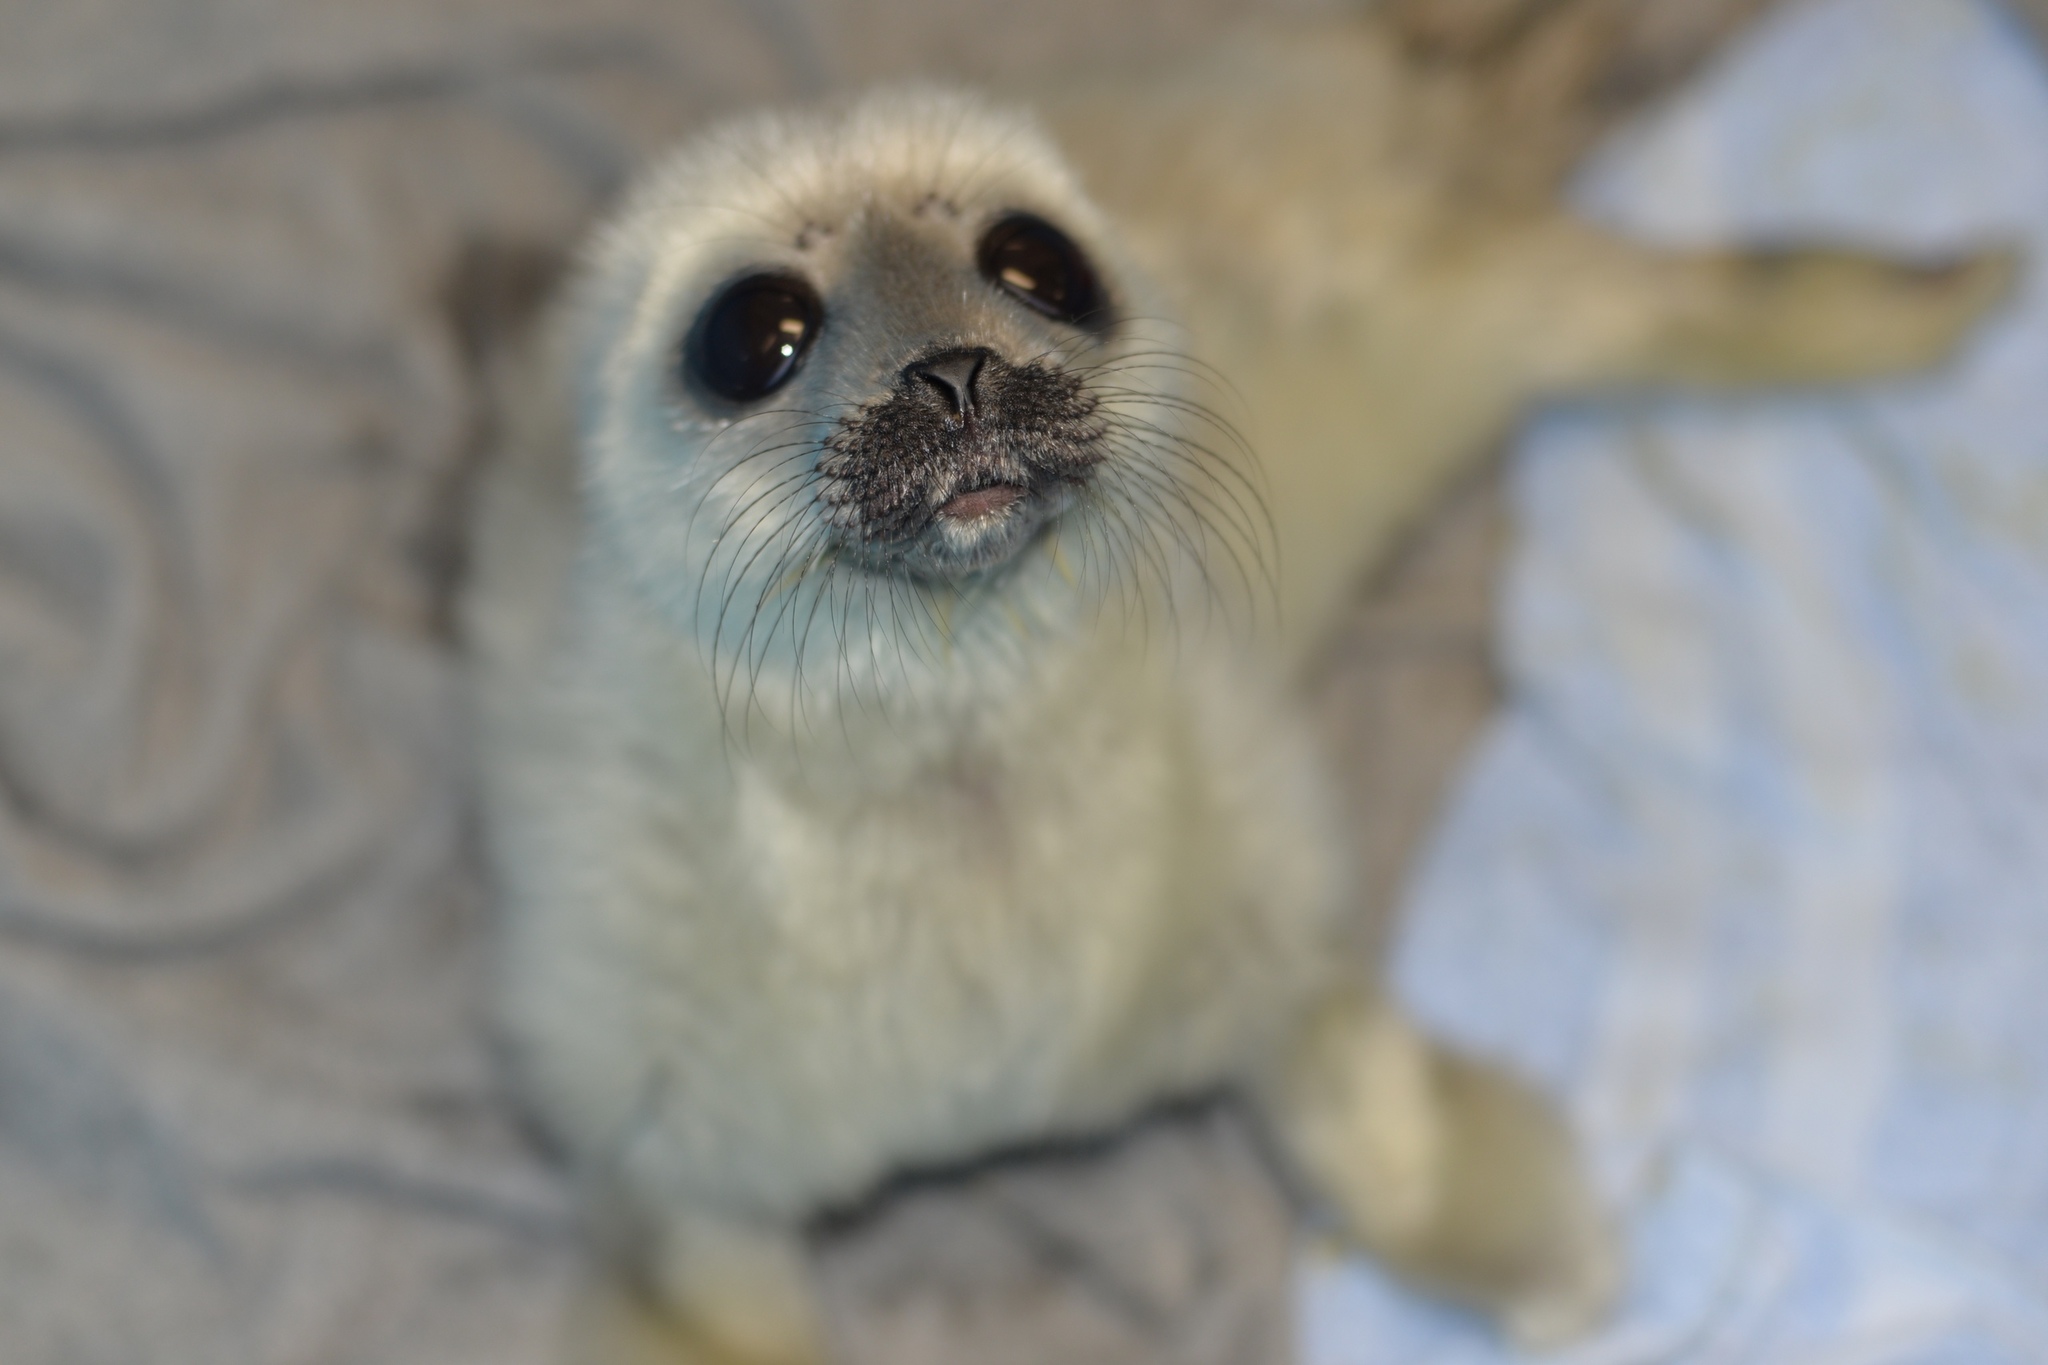 News about Baby Xenia - Milota, Seal, Ringed seal, Friends of the Baltic Seal Foundation, The photo, Longpost